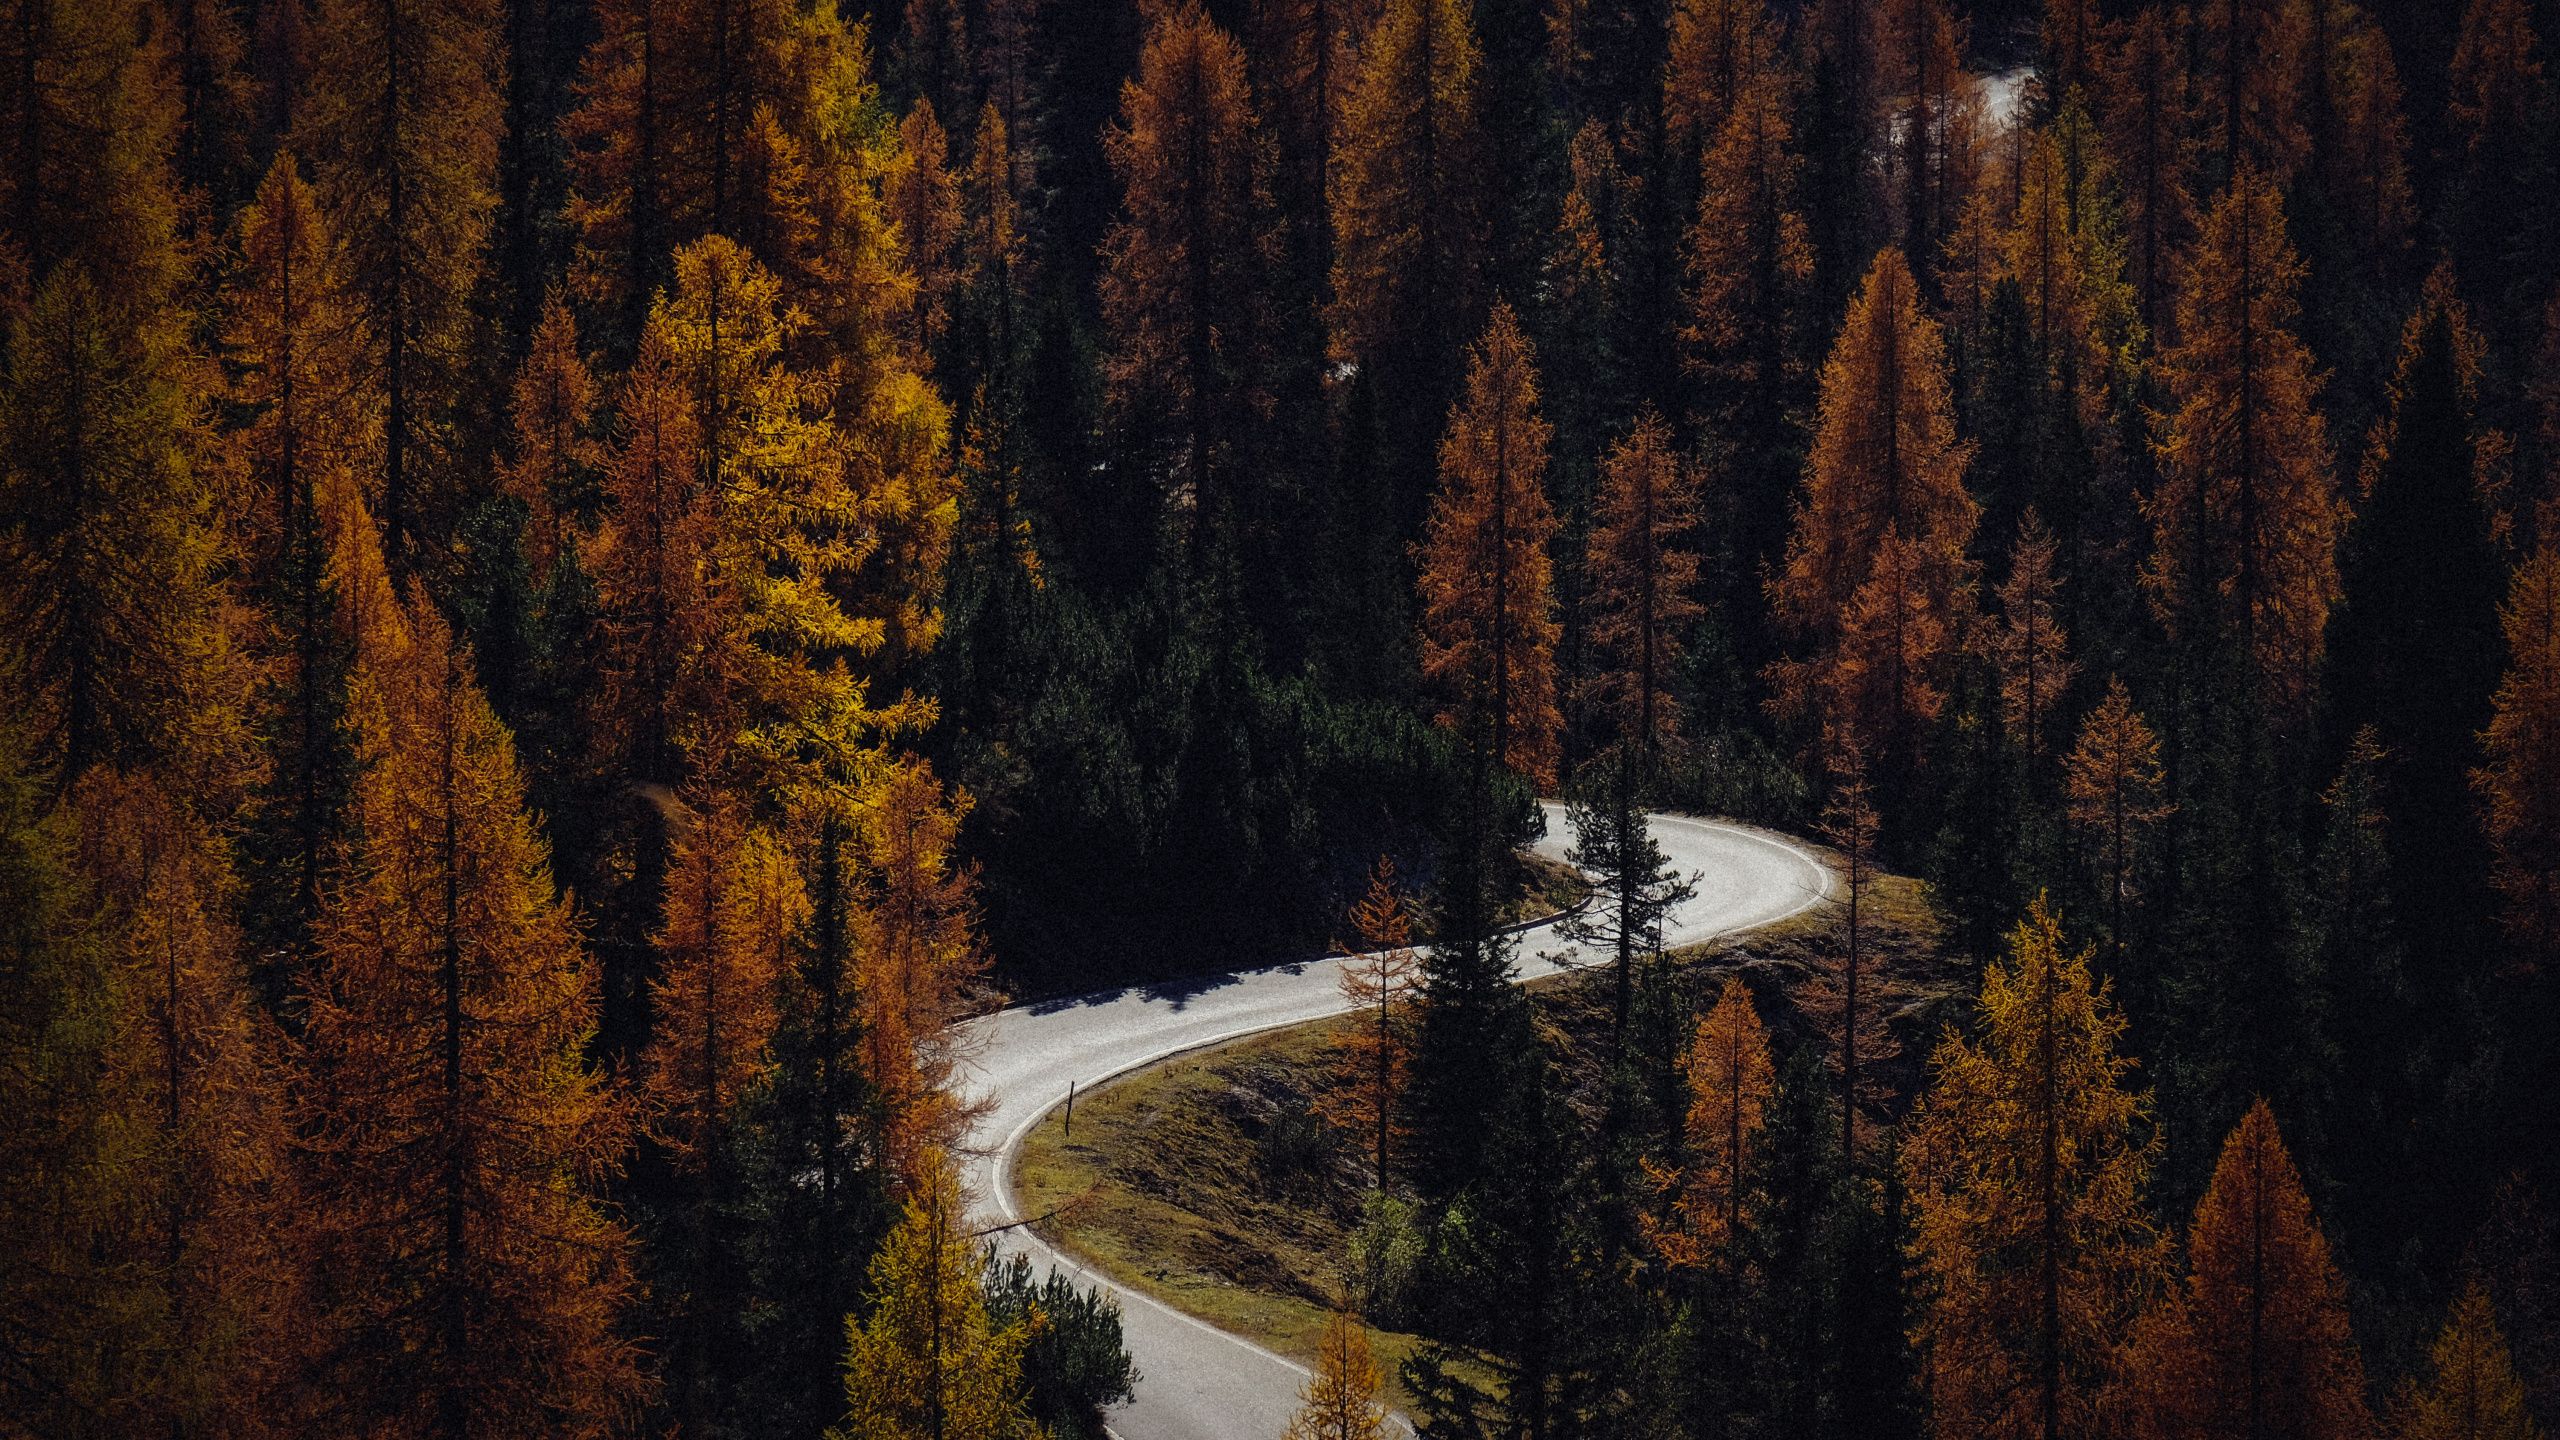 Download Autumn, road, turns, forest, nature wallpaper, 2560x Dual Wide, Widescreen 16: Widescreen